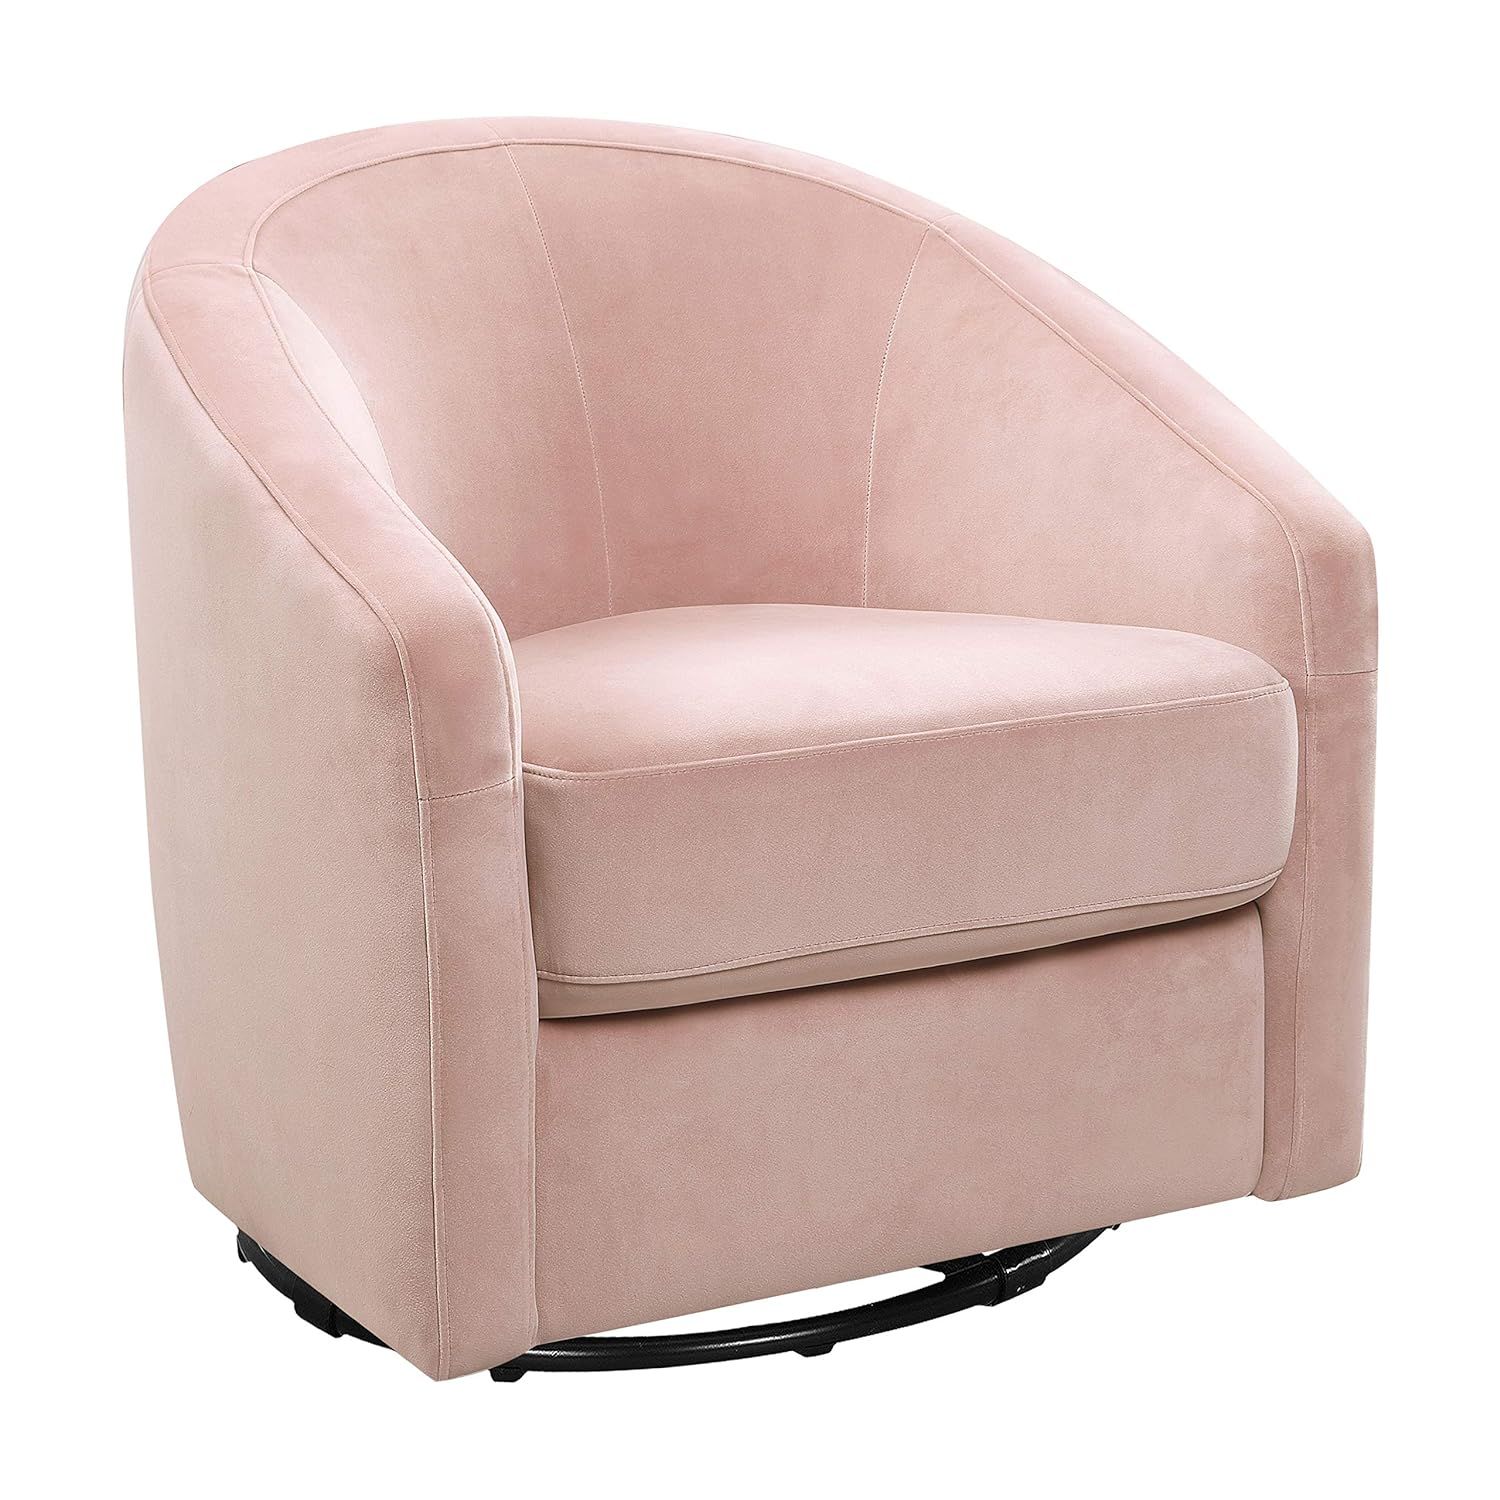 Babyletto Madison Swivel Glider in Blush Pink Velvet, Greenguard Gold and CertiPUR-US Certified | Amazon (US)